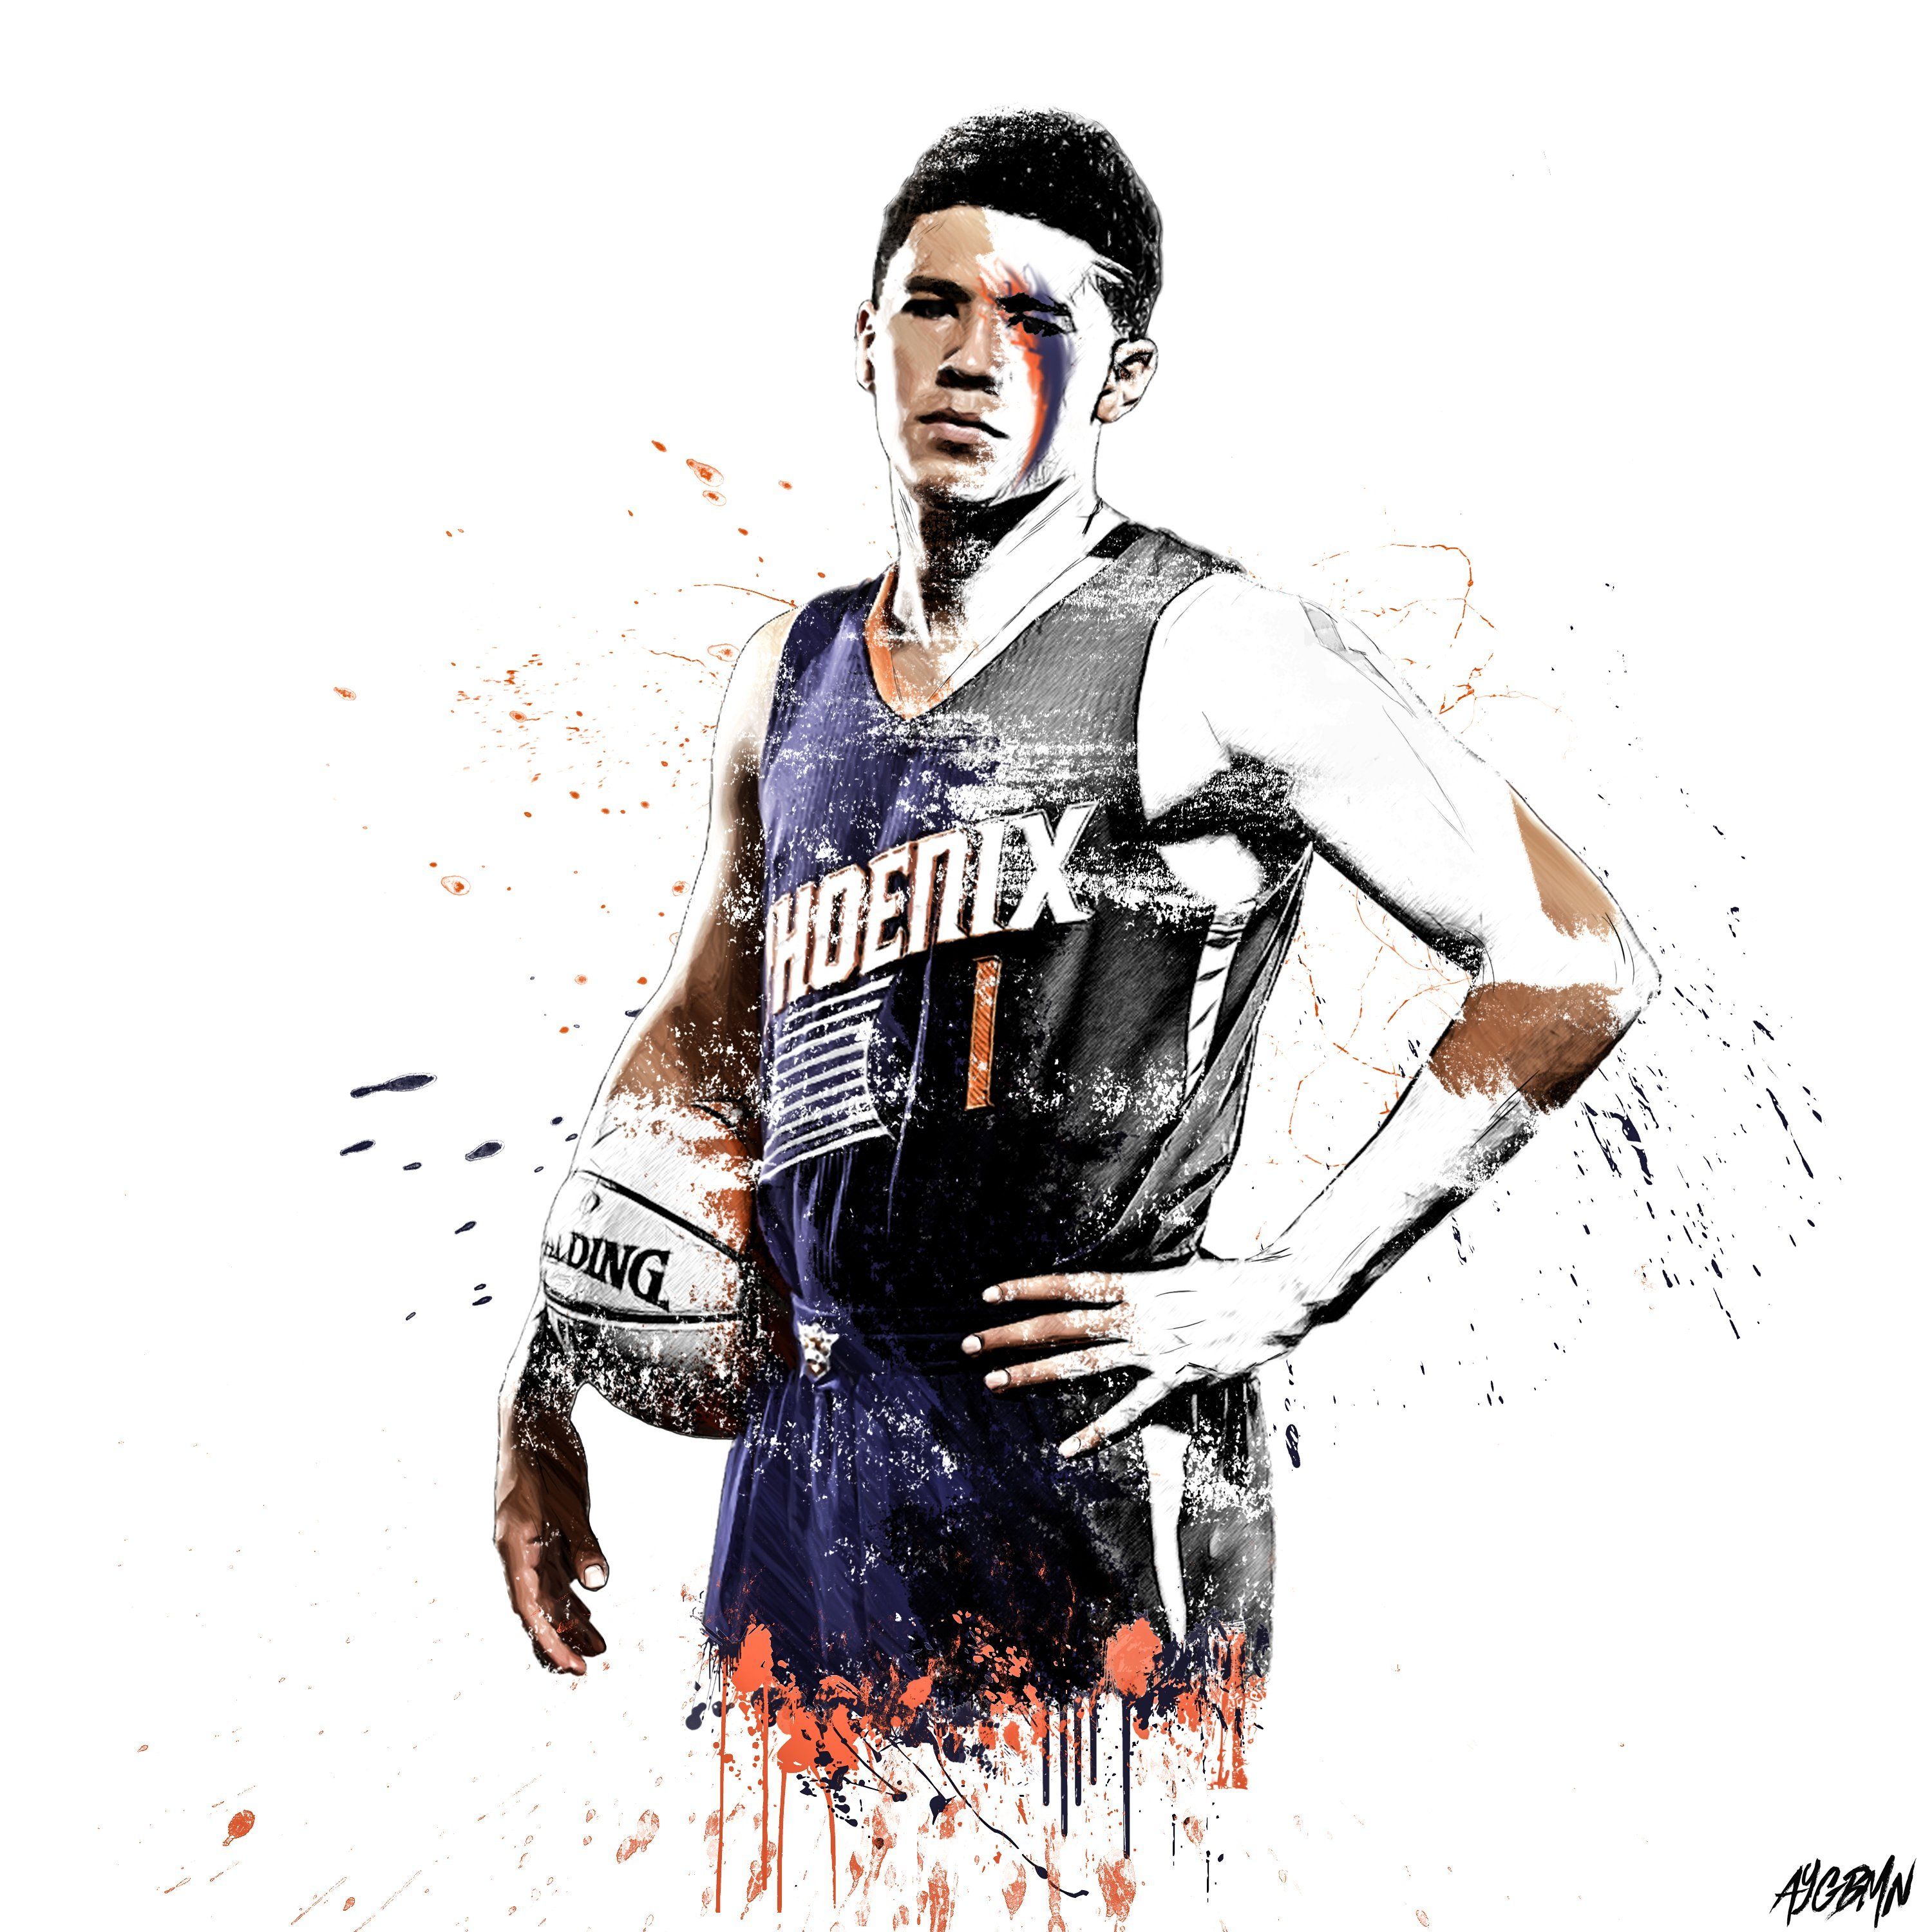 Free download Devin Booker Wallpapers Phoenix Suns by Aygbmn 4304 Wallpaper...